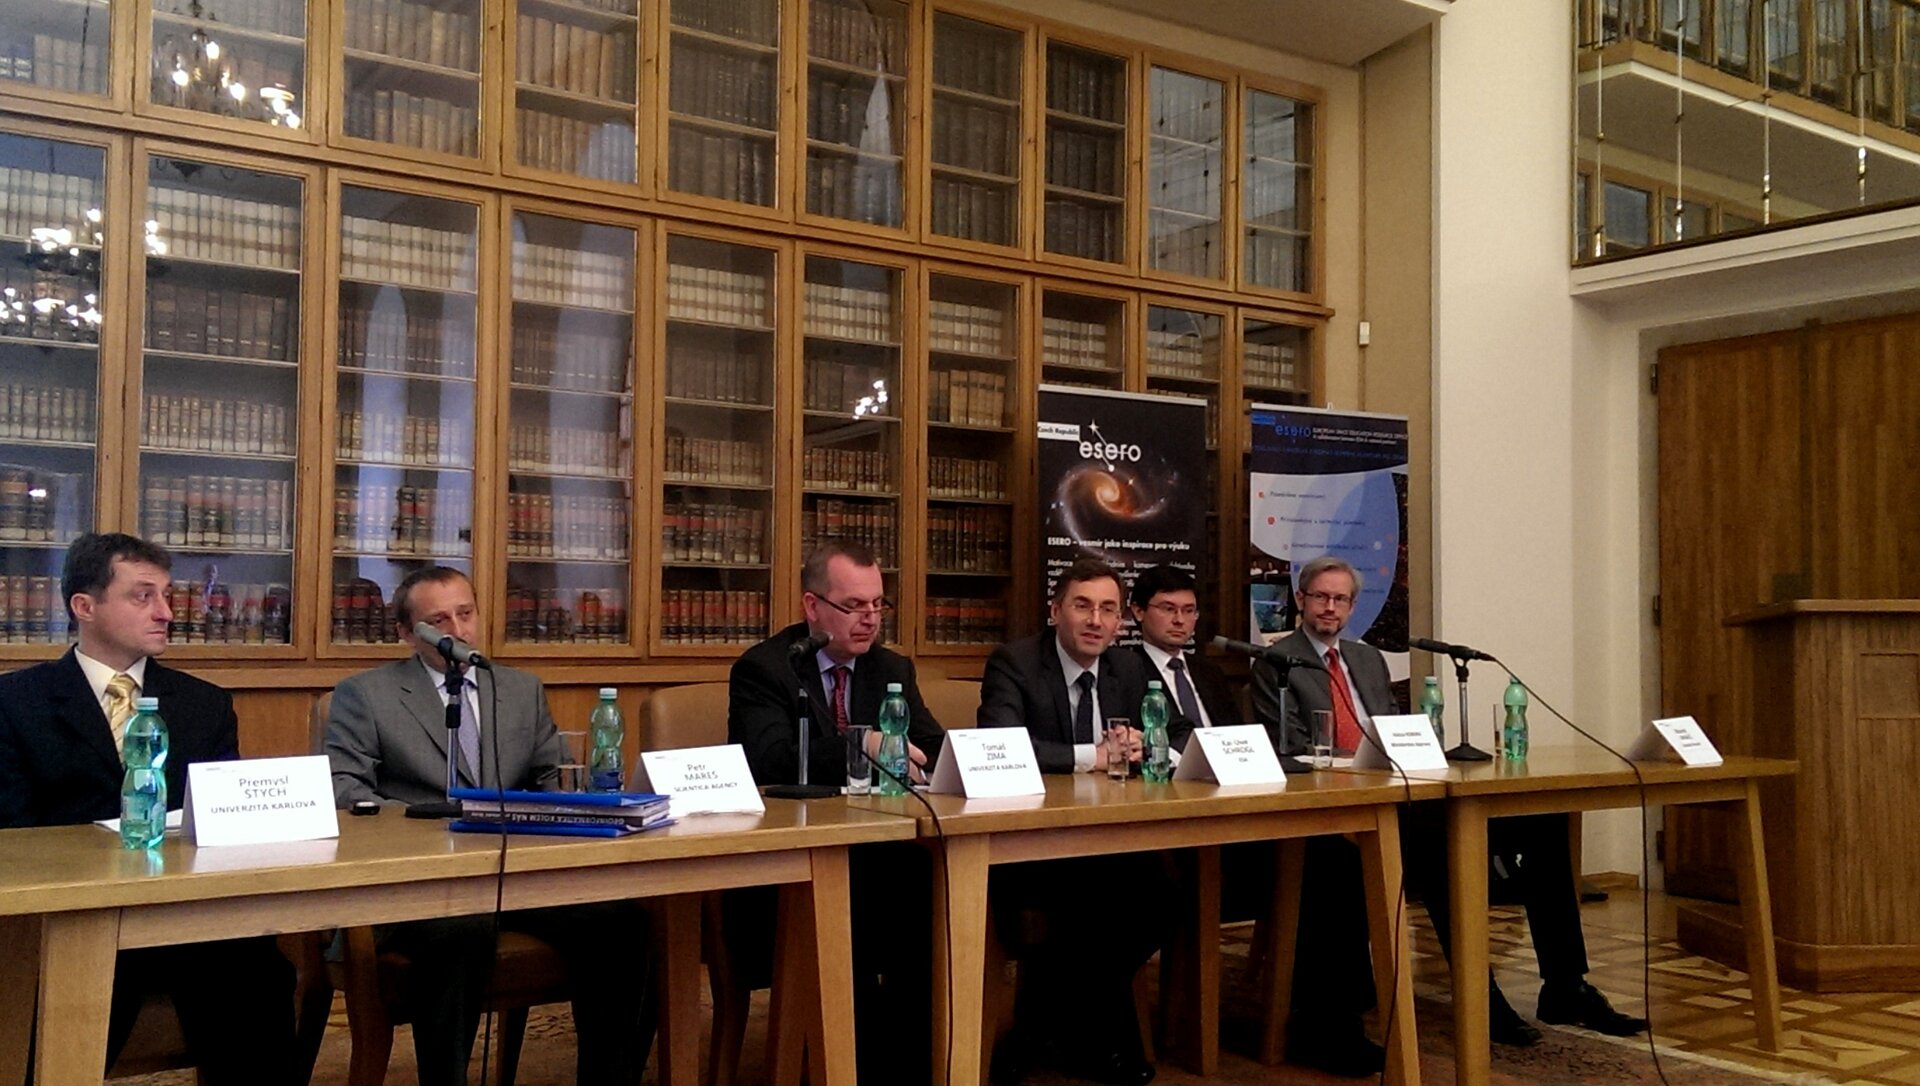 The launch event took place in Charles University, Prague